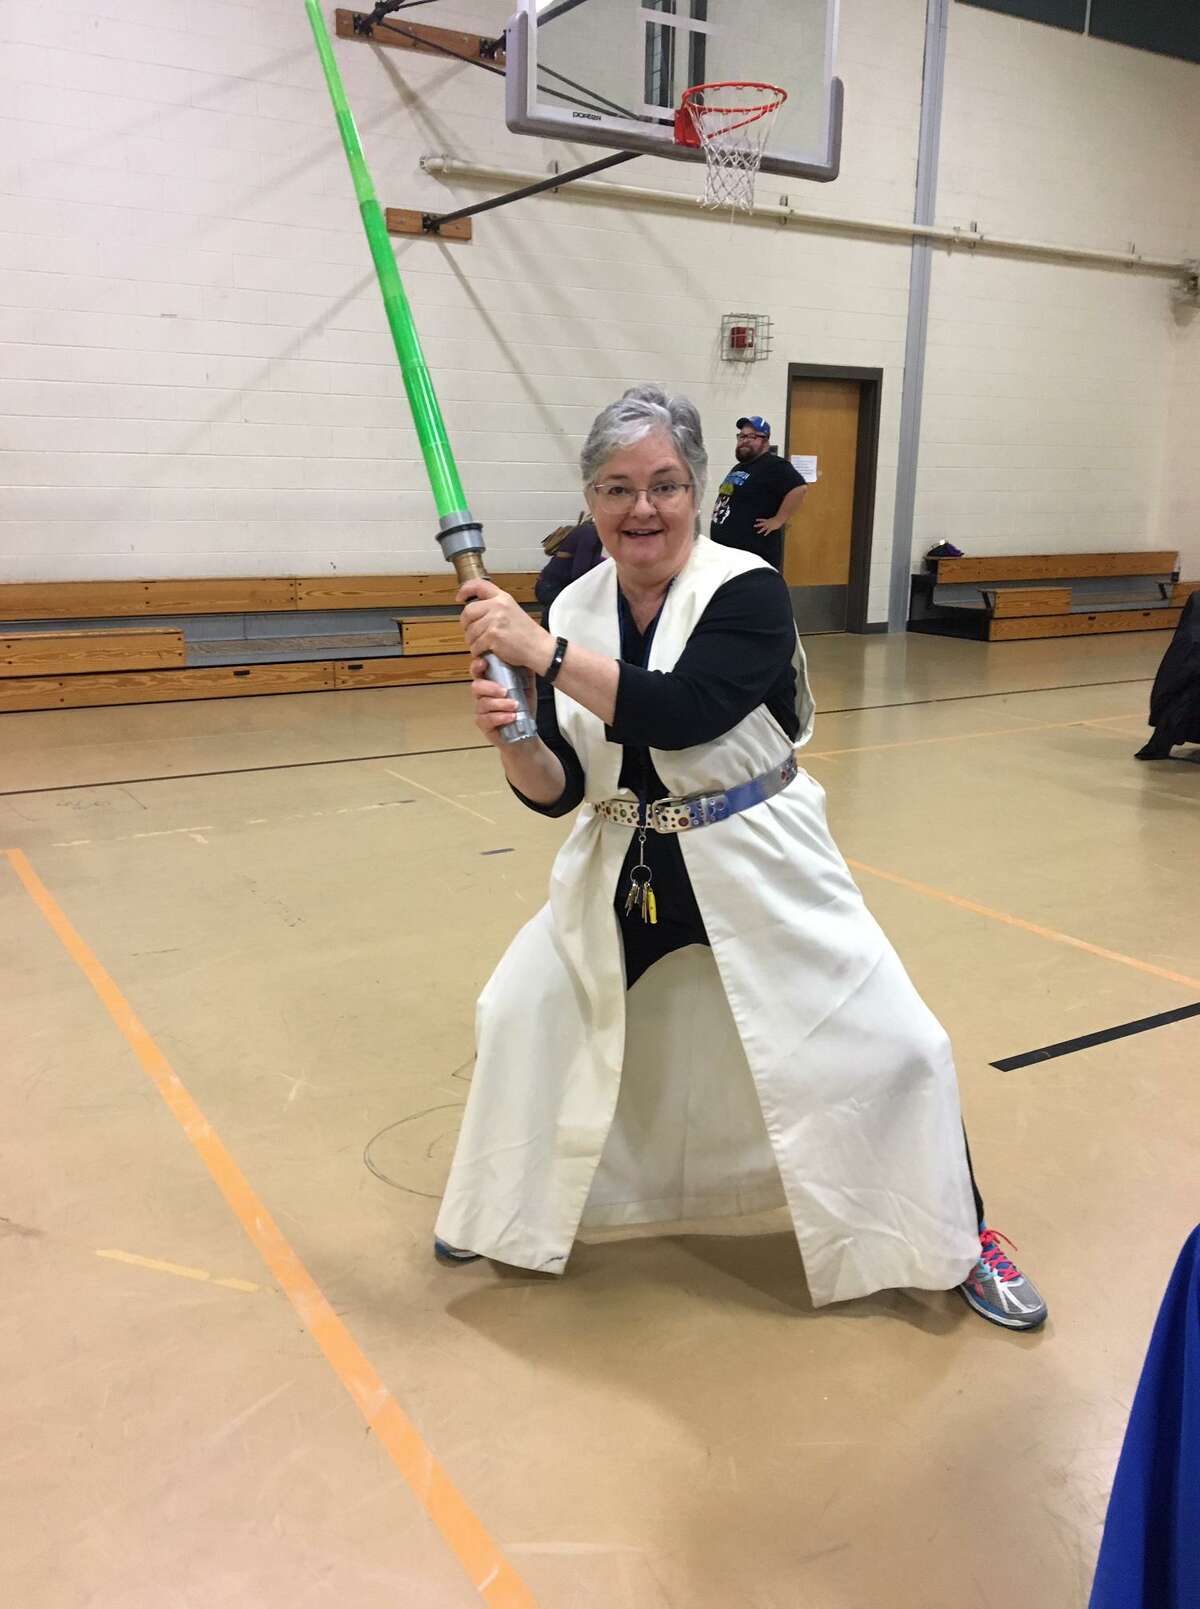 Andrea Boissevain, Director of Health for Stratford Health Department, gets into character at last years Star Wars themed flu clinic. Themed clinics have been a fun and interactive way to engage children and families while getting their flu vaccine.